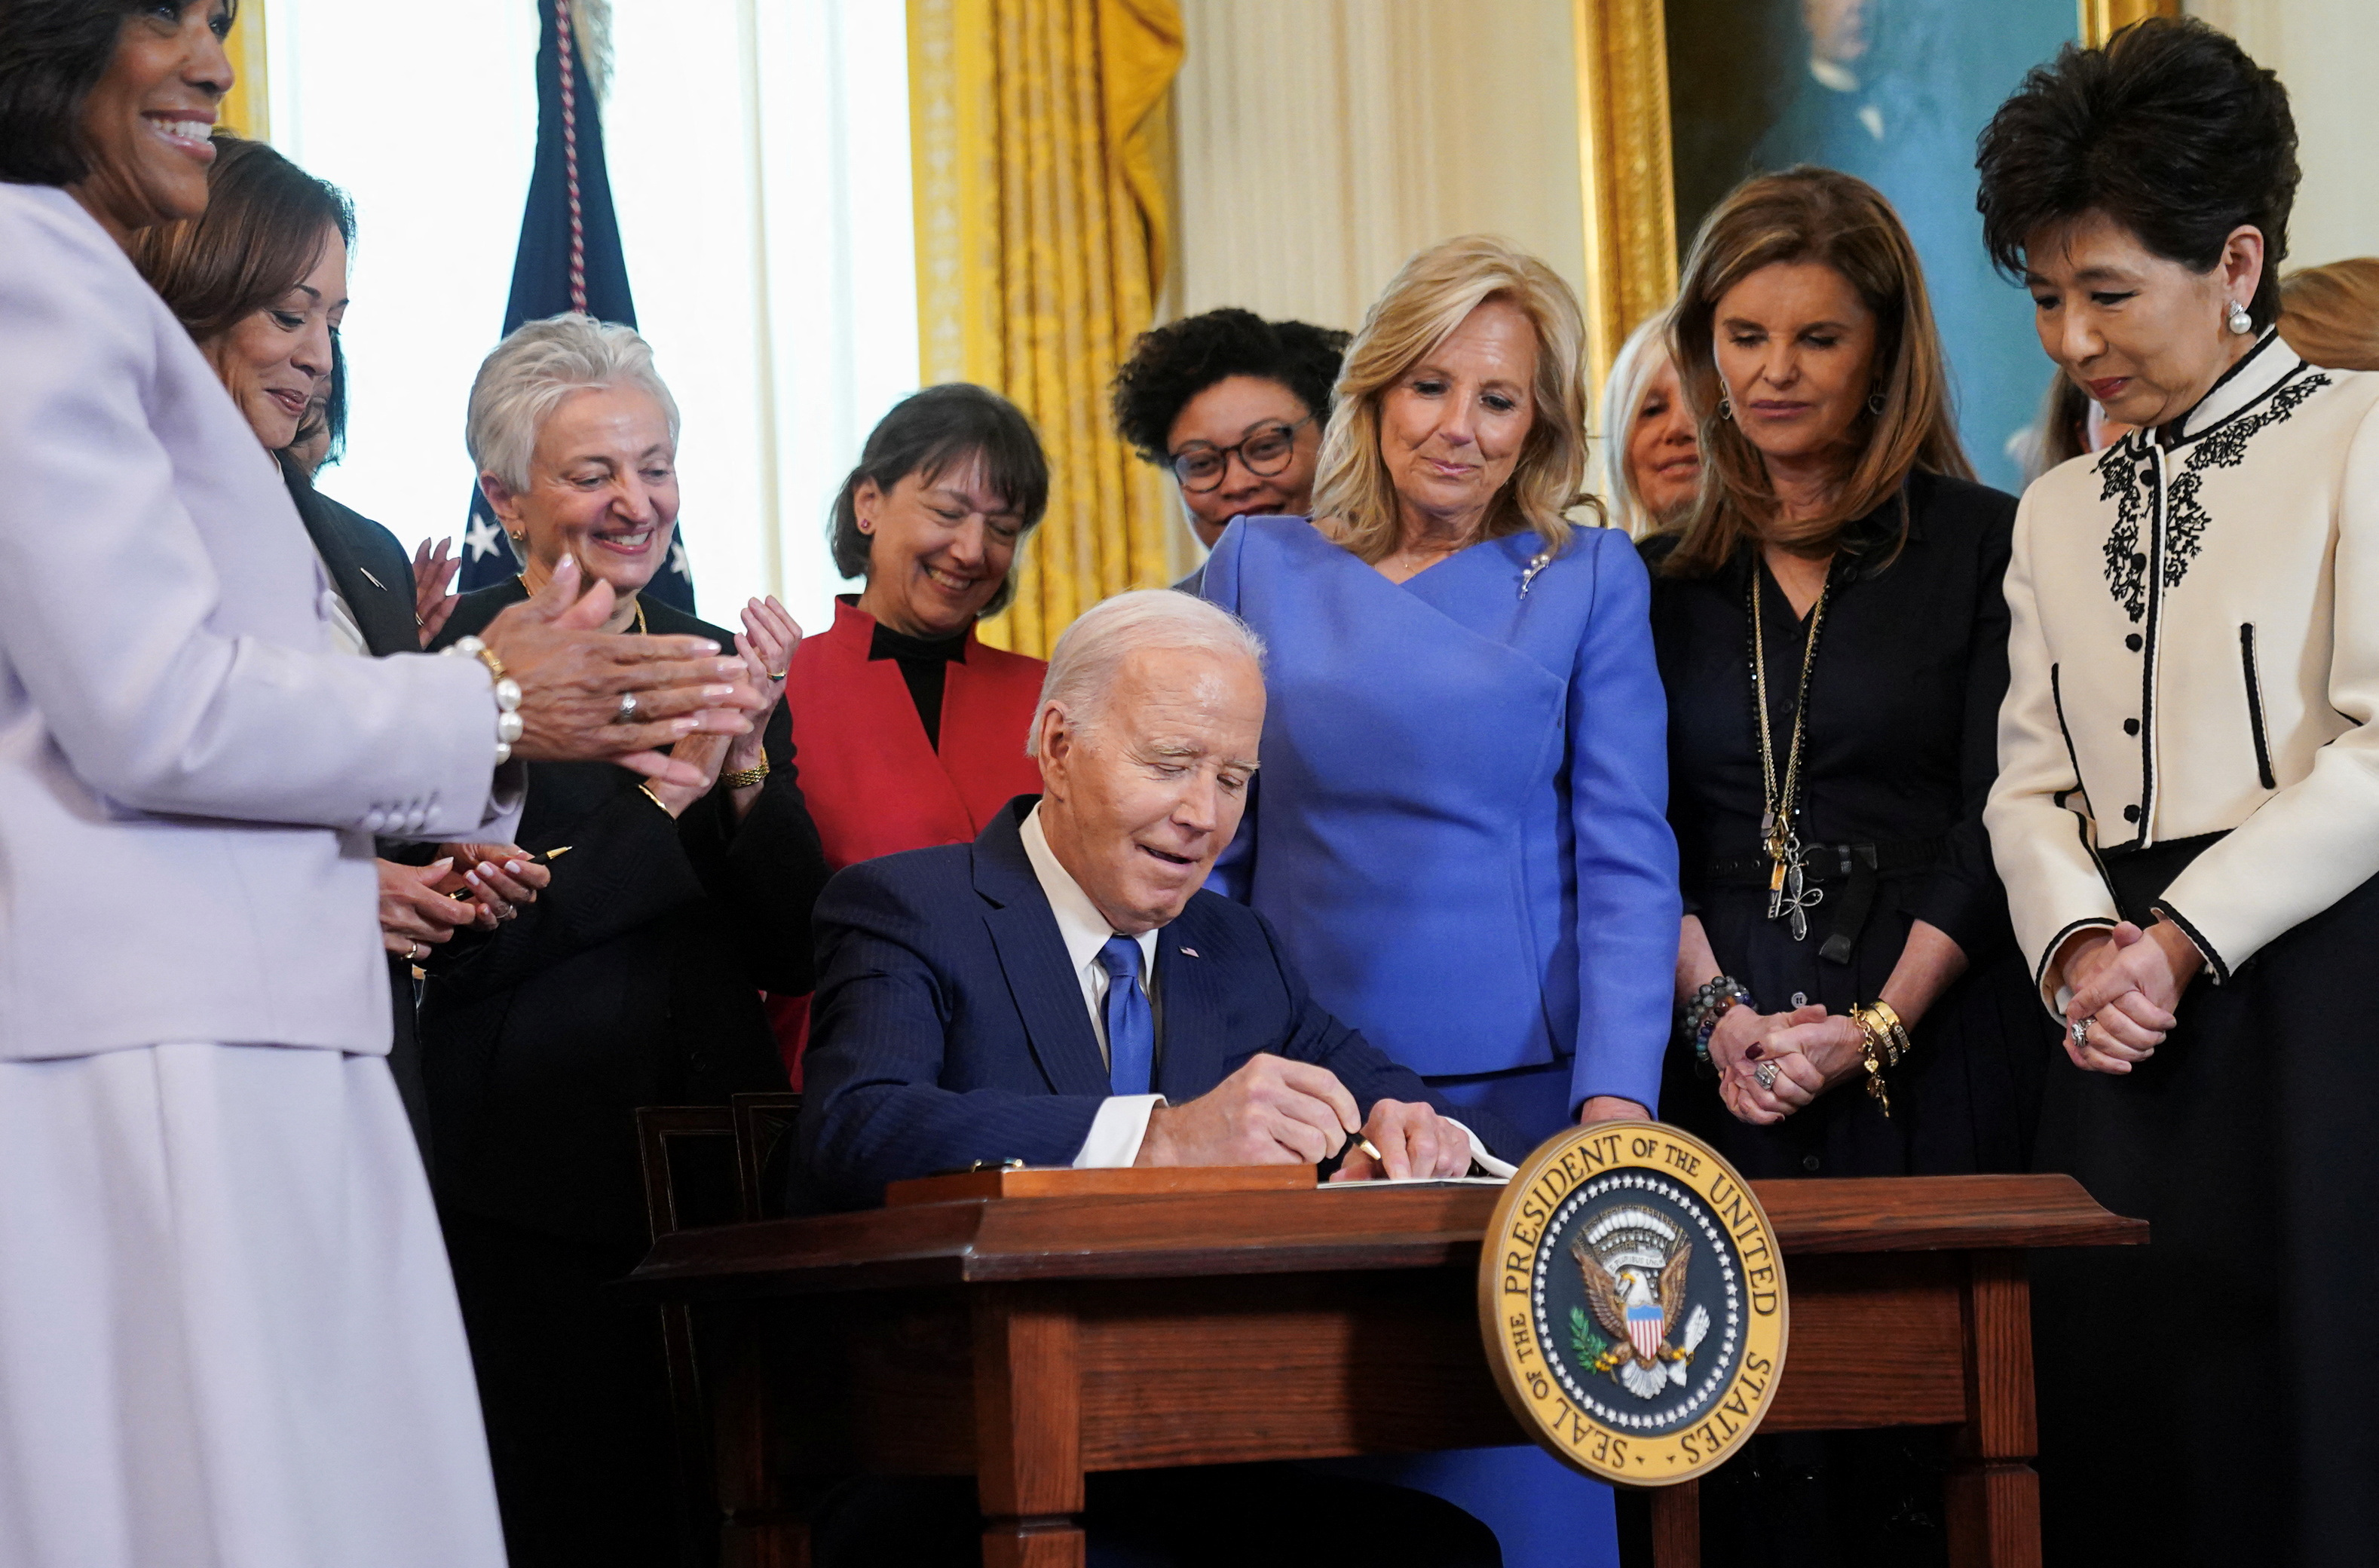 The Bidens host a Women’s History Month reception at the White House in Washington